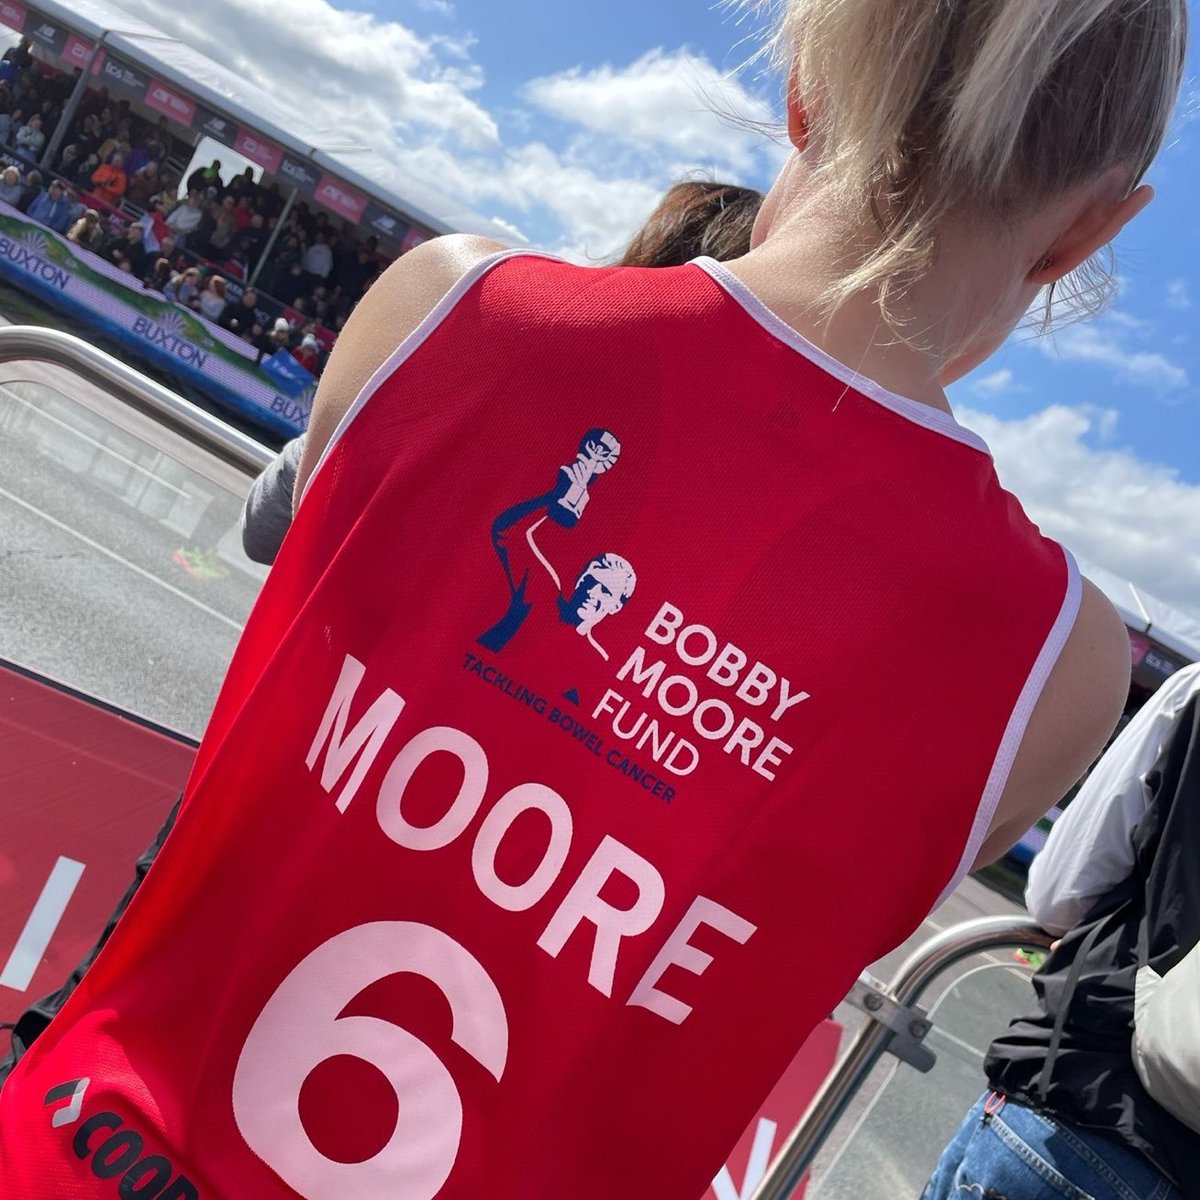 Congratulations and well done to @IzzyChr17 for completing the @LondonMarathon and raising funds for the Bobby Moore Fund. 

Izzy's support has been incredible and will help us continue to fund vital bowel cancer research. 

See you this week for #FootballShirtFriday ❤️